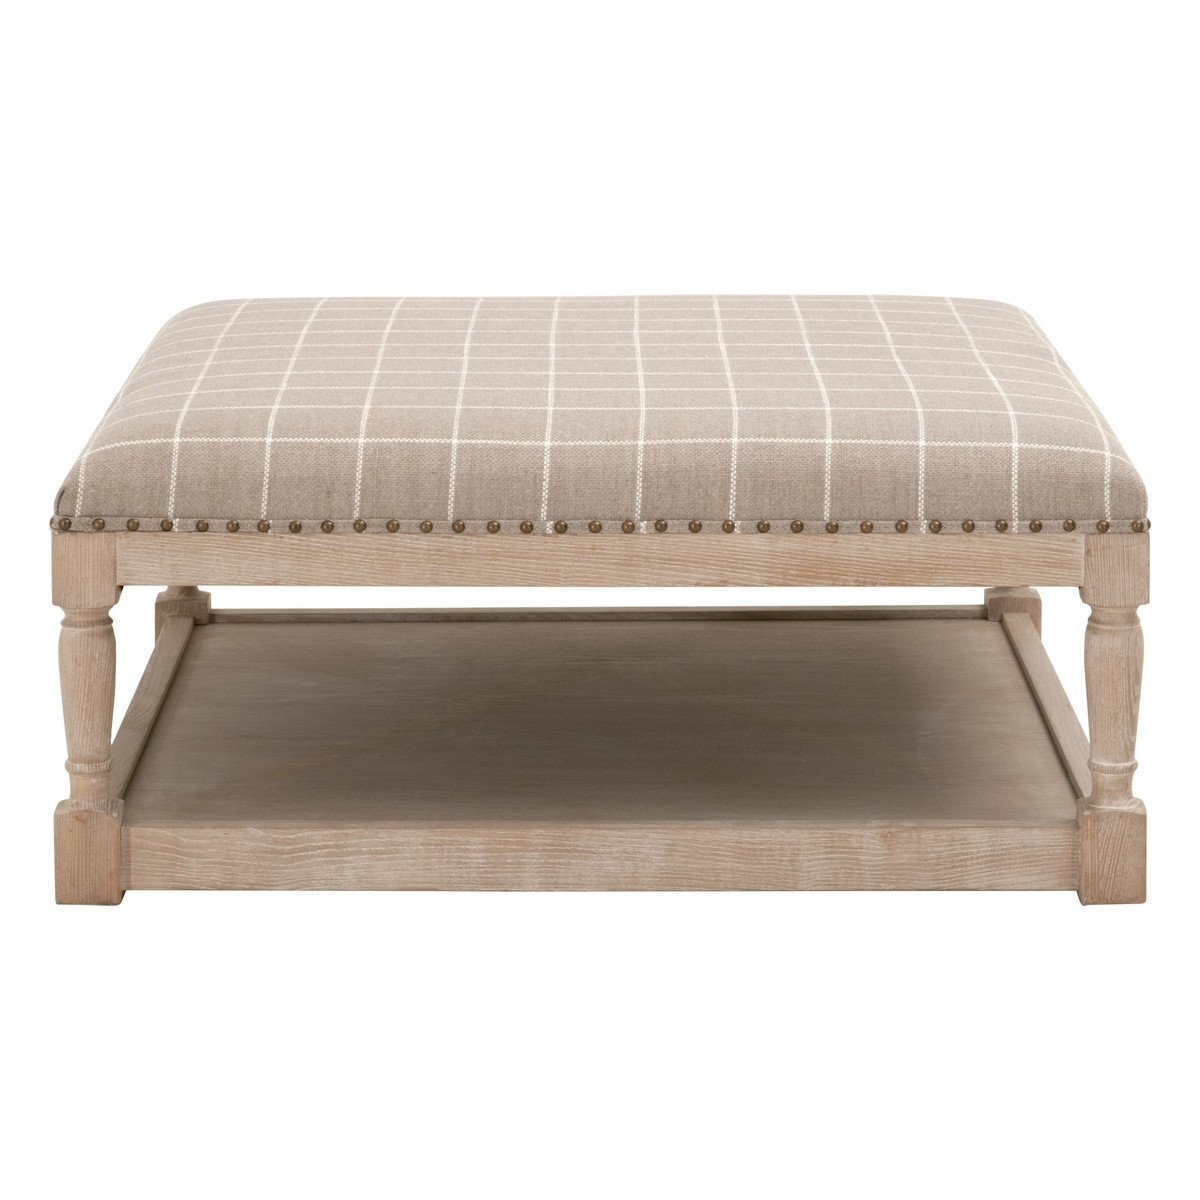 Townsend Upholstered Coffee Table, Pebble - Image 0